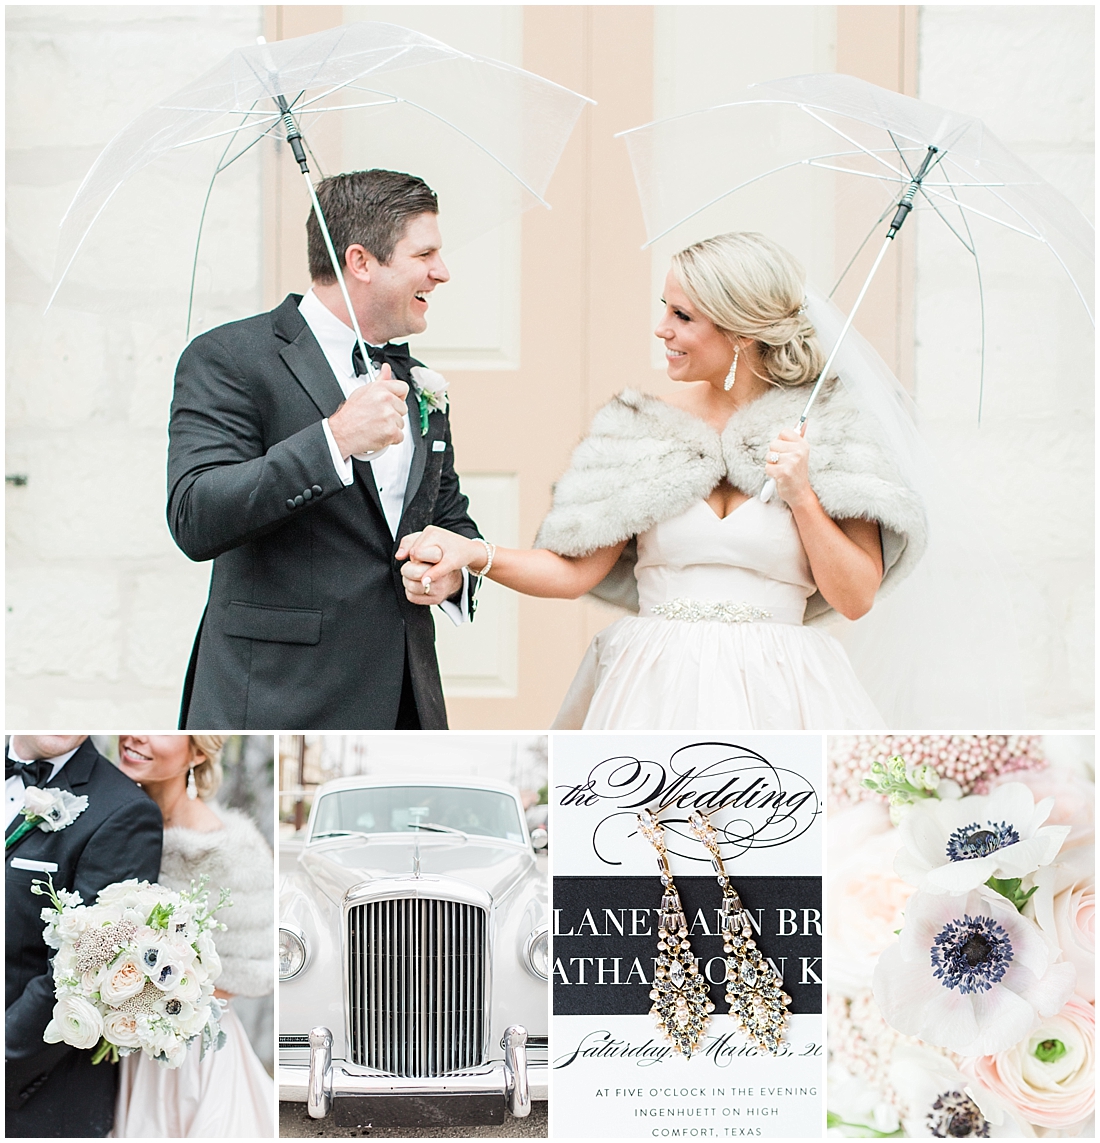 An Art Deco Black Tie Wedding at The Ingenhuett On High in Comfort Texas Featuring a Bentley Vintage Car and Blush Wedding Dress 0143